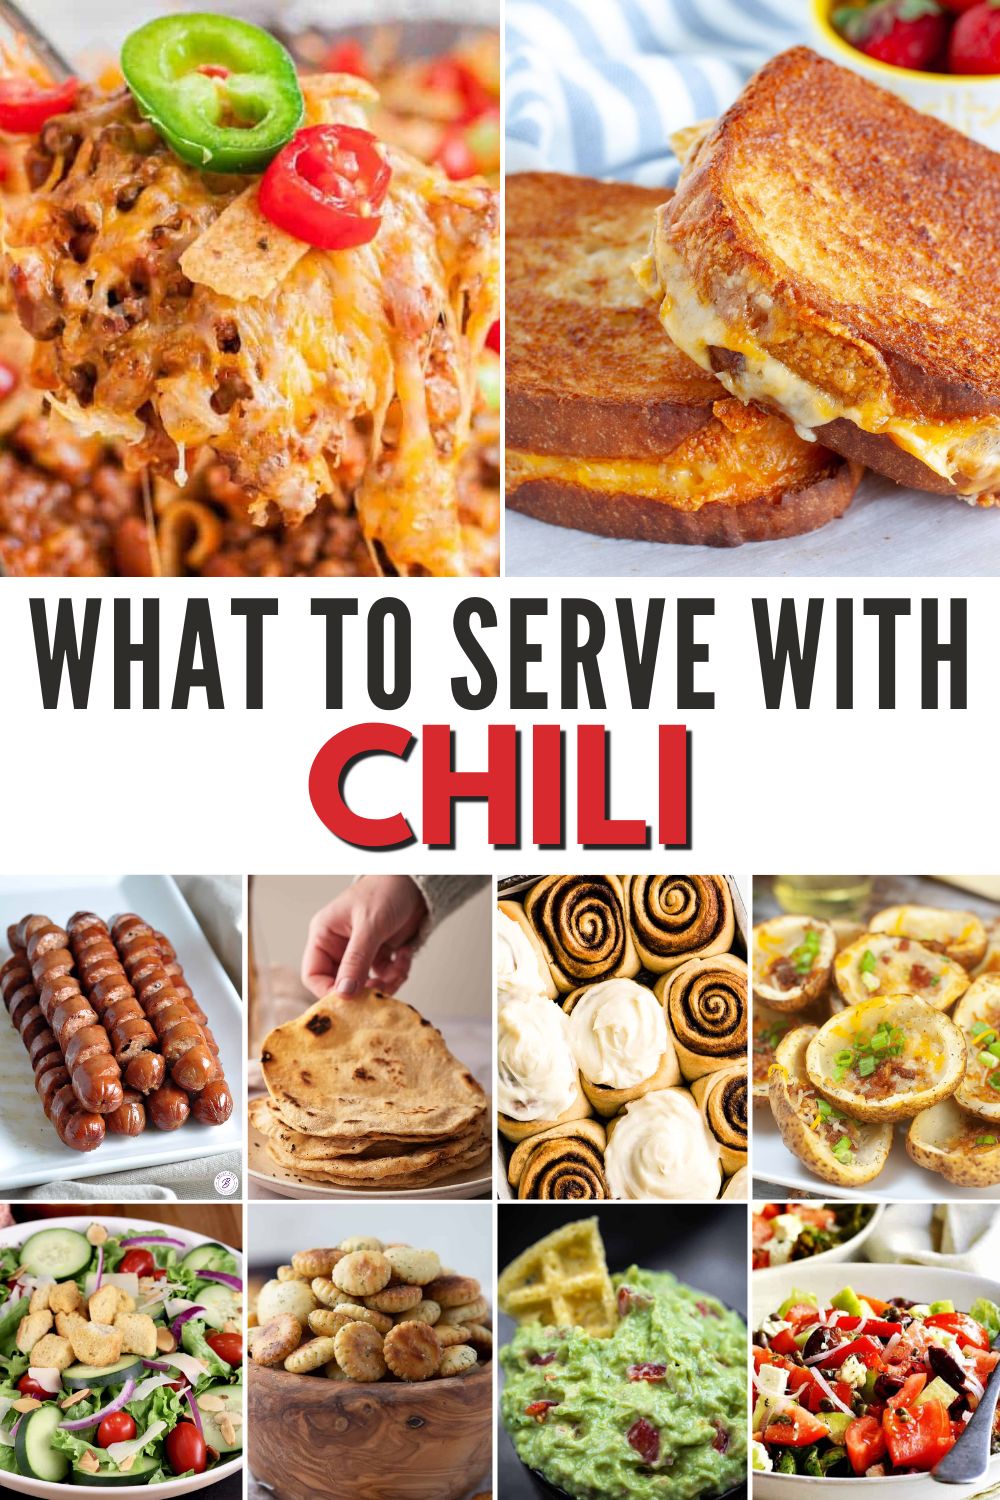 A picture of various side dishes with title of "What to serve with Chili".